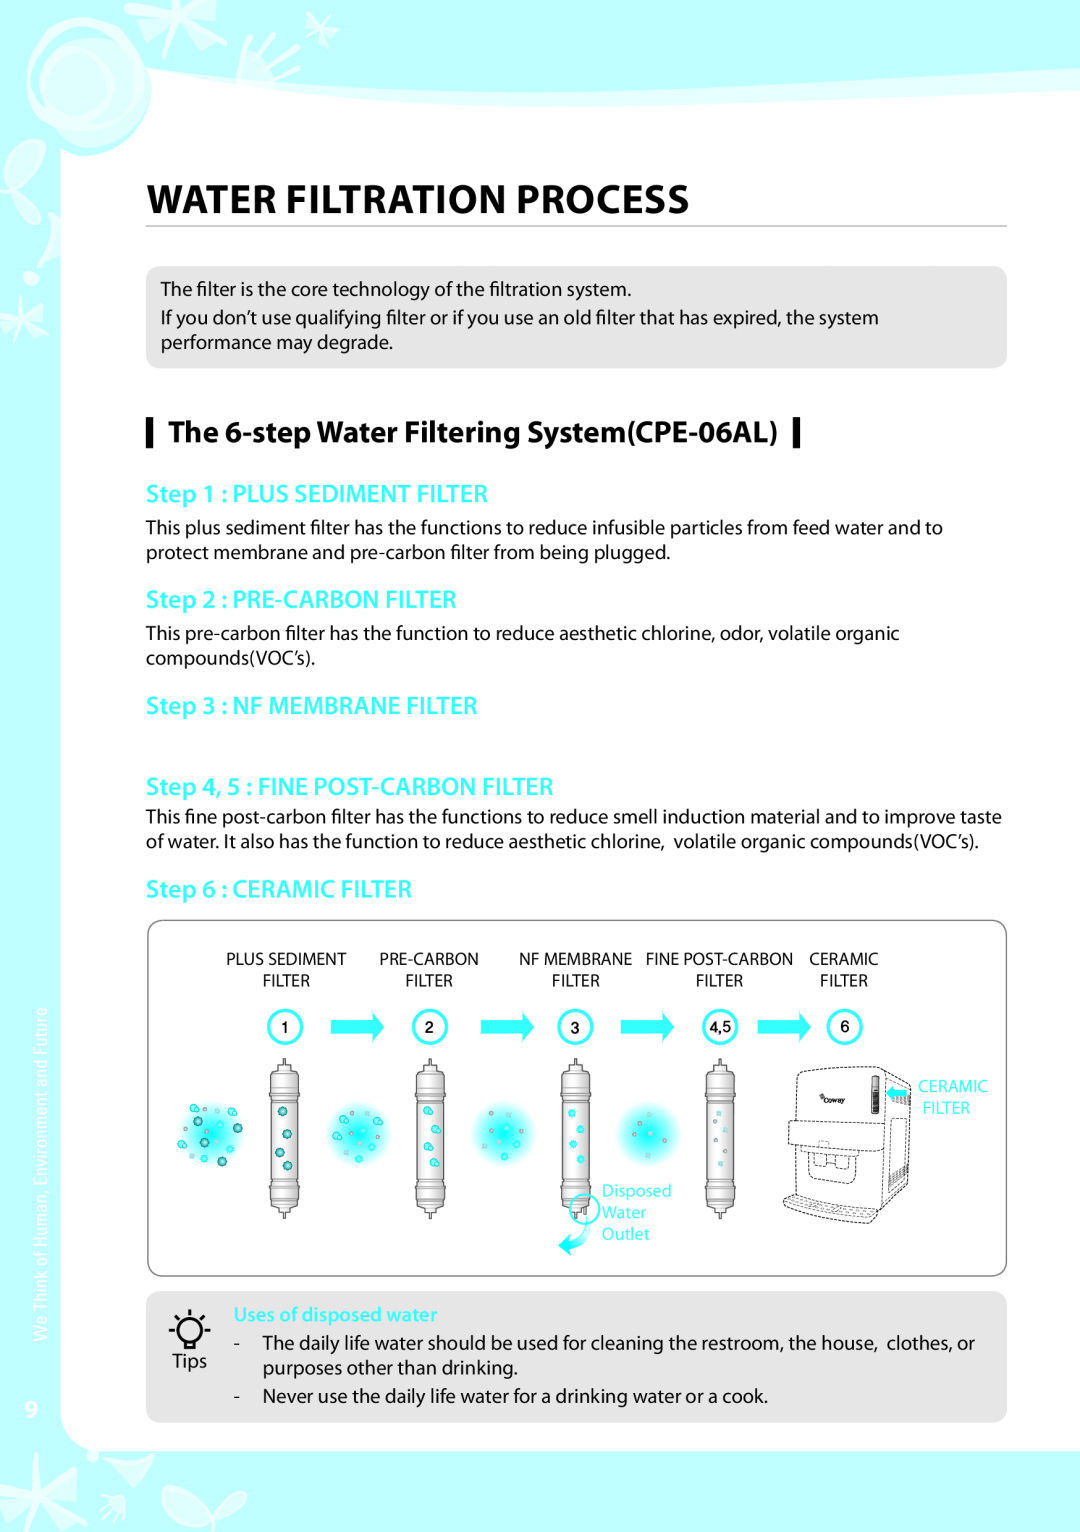 Coway CPE-06ALB The 6-step Water Filtering SystemCPE-06AL, NF MEMBRANE FILTER , 5 FINE POST-CARBON FILTER, Ceramic Filter 